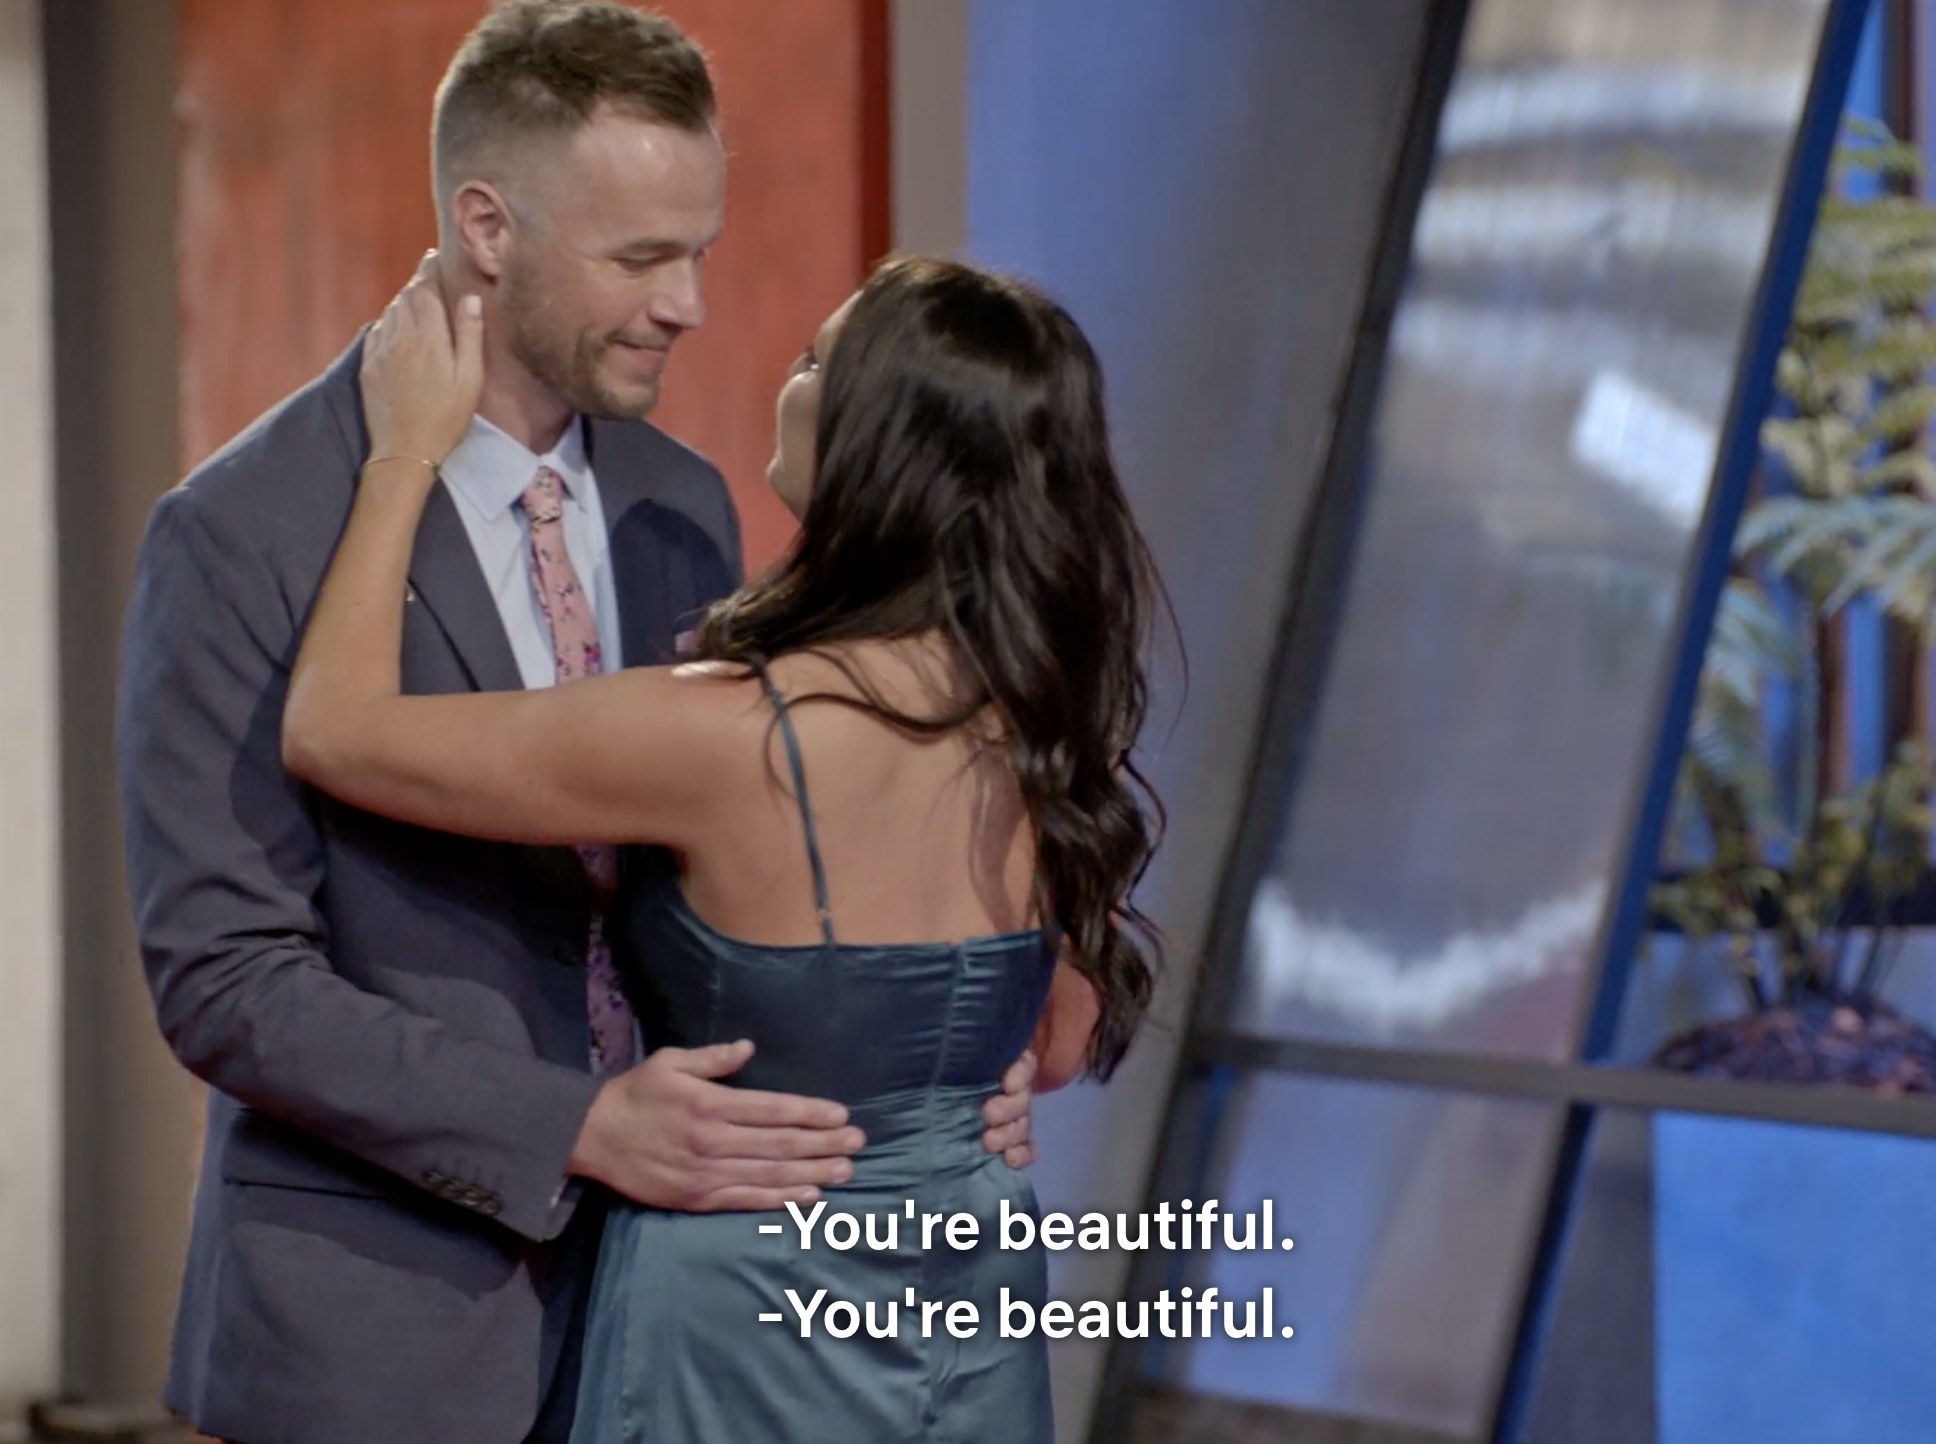 Nick and Danielle meet for the first time on &quot;Love Is Blind&quot; and tell each other they&#x27;re beautiful